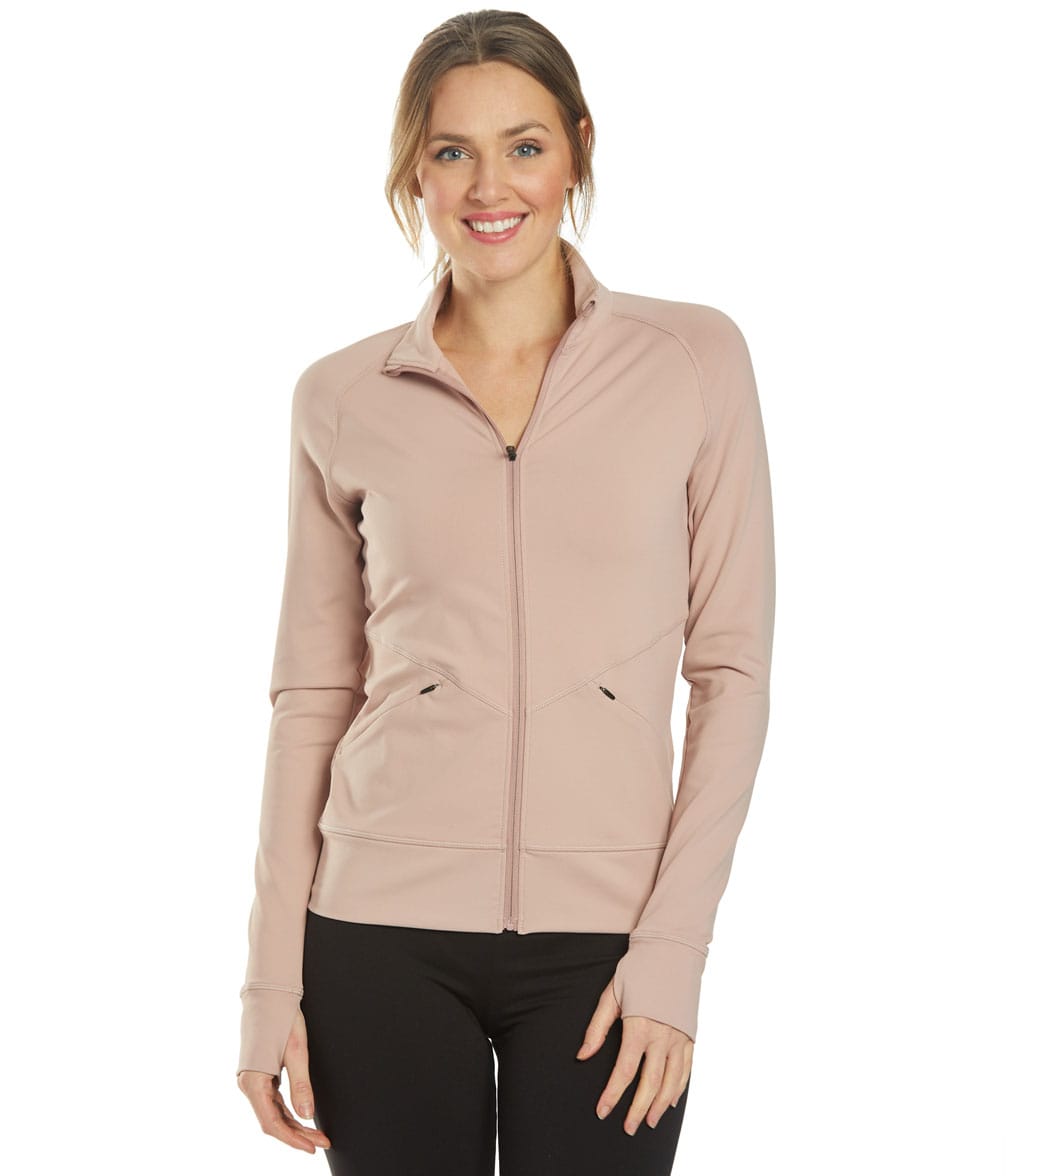 Lole Women's Essential Up Cardigan Jacket - Sweet Mauve Small Size Small - Swimoutlet.com